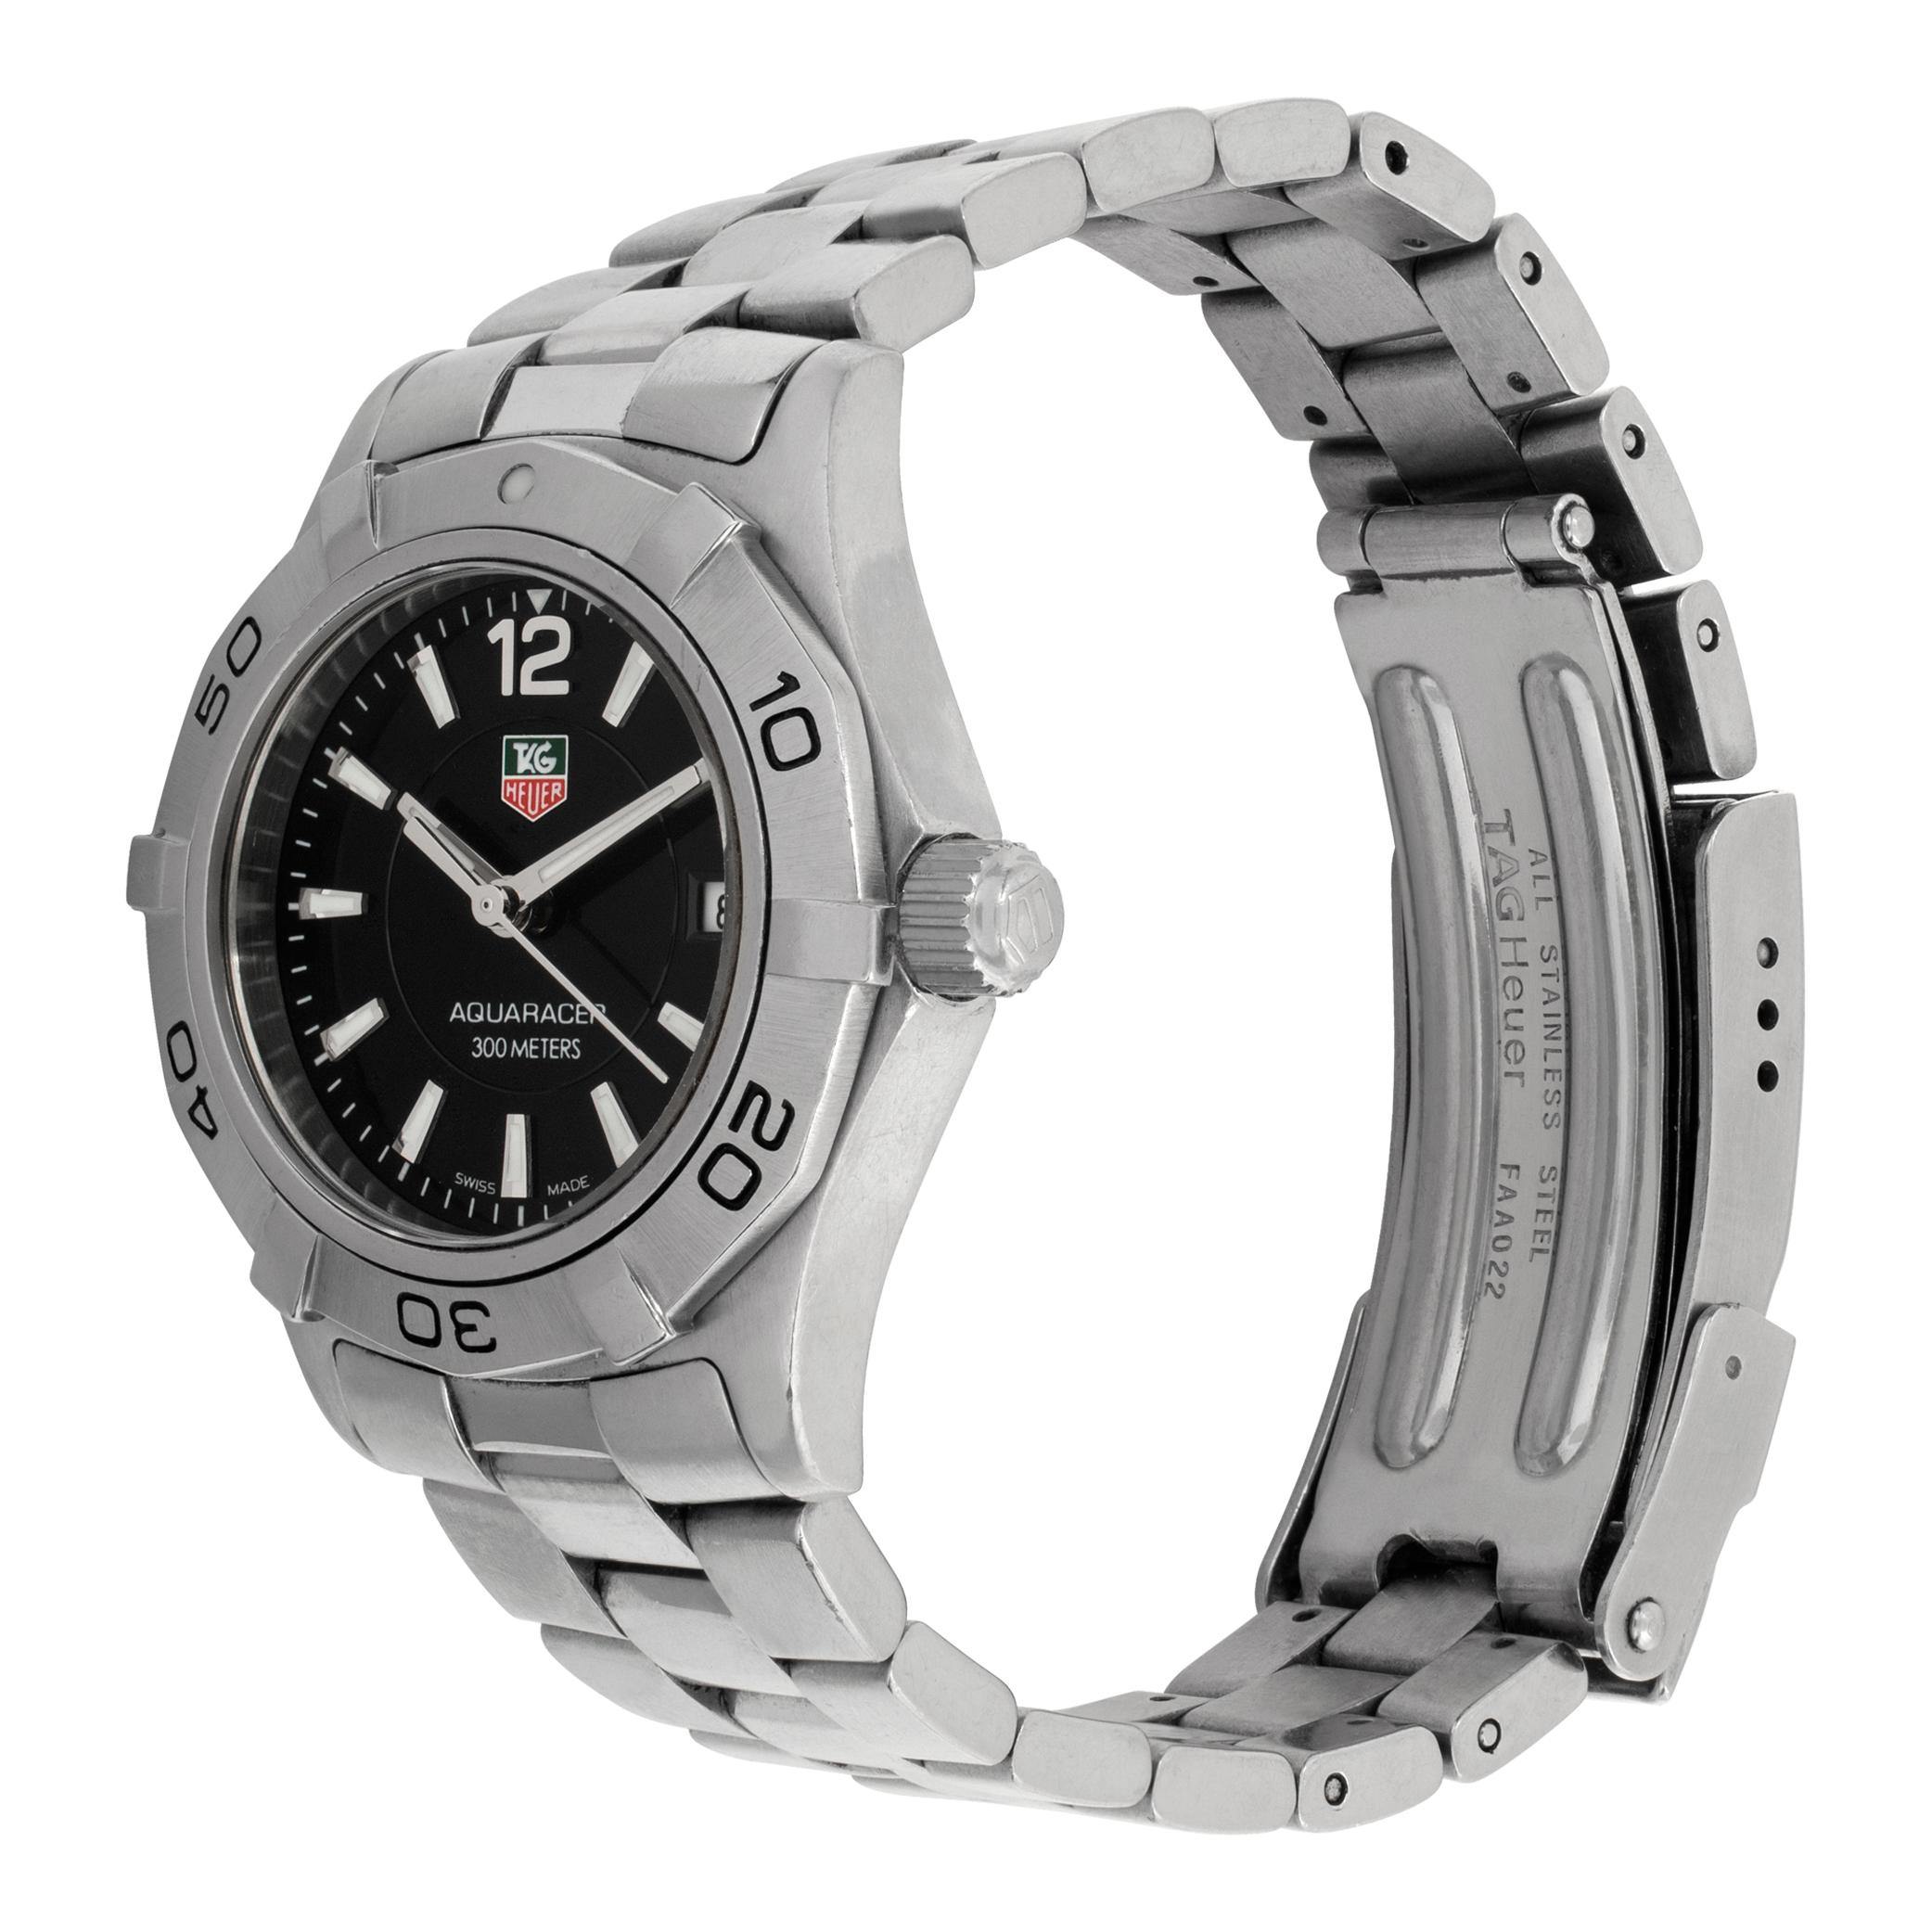 Tag Heuer Aquaracer in stainless steel. Quartz w/ date. 27 mm case size. With box. Ref waf1410. Fine Pre-owned Tag Heuer Watch.

 Certified preowned Sport Tag Heuer Aquaracer waf1410 watch is made out of Stainless steel on a Stainless Steel bracelet